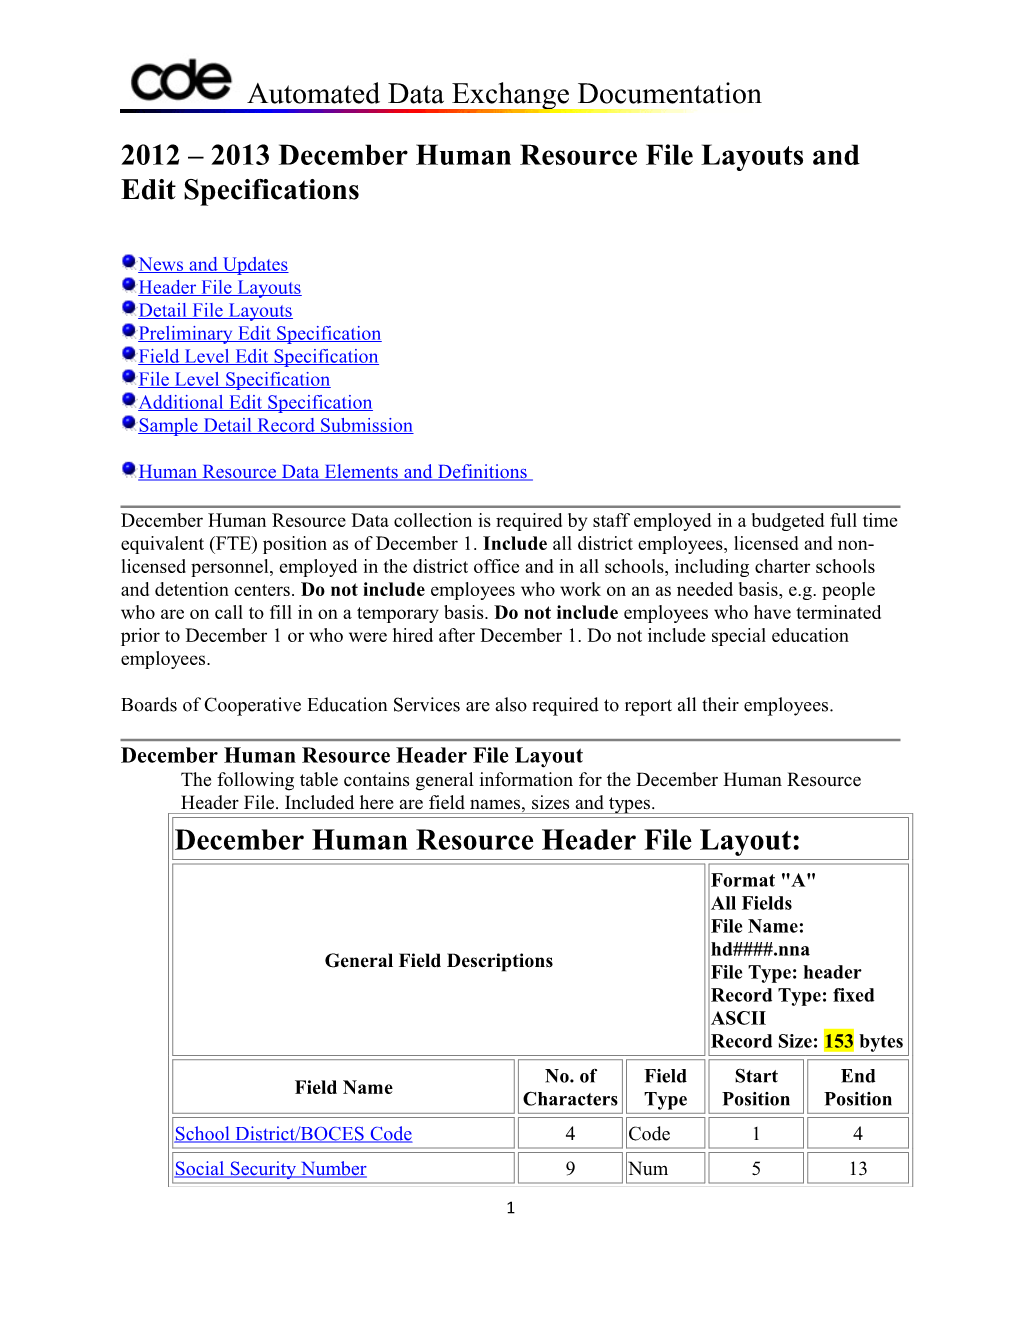 2012 2013December Human Resource File Layouts and Edit Specifications